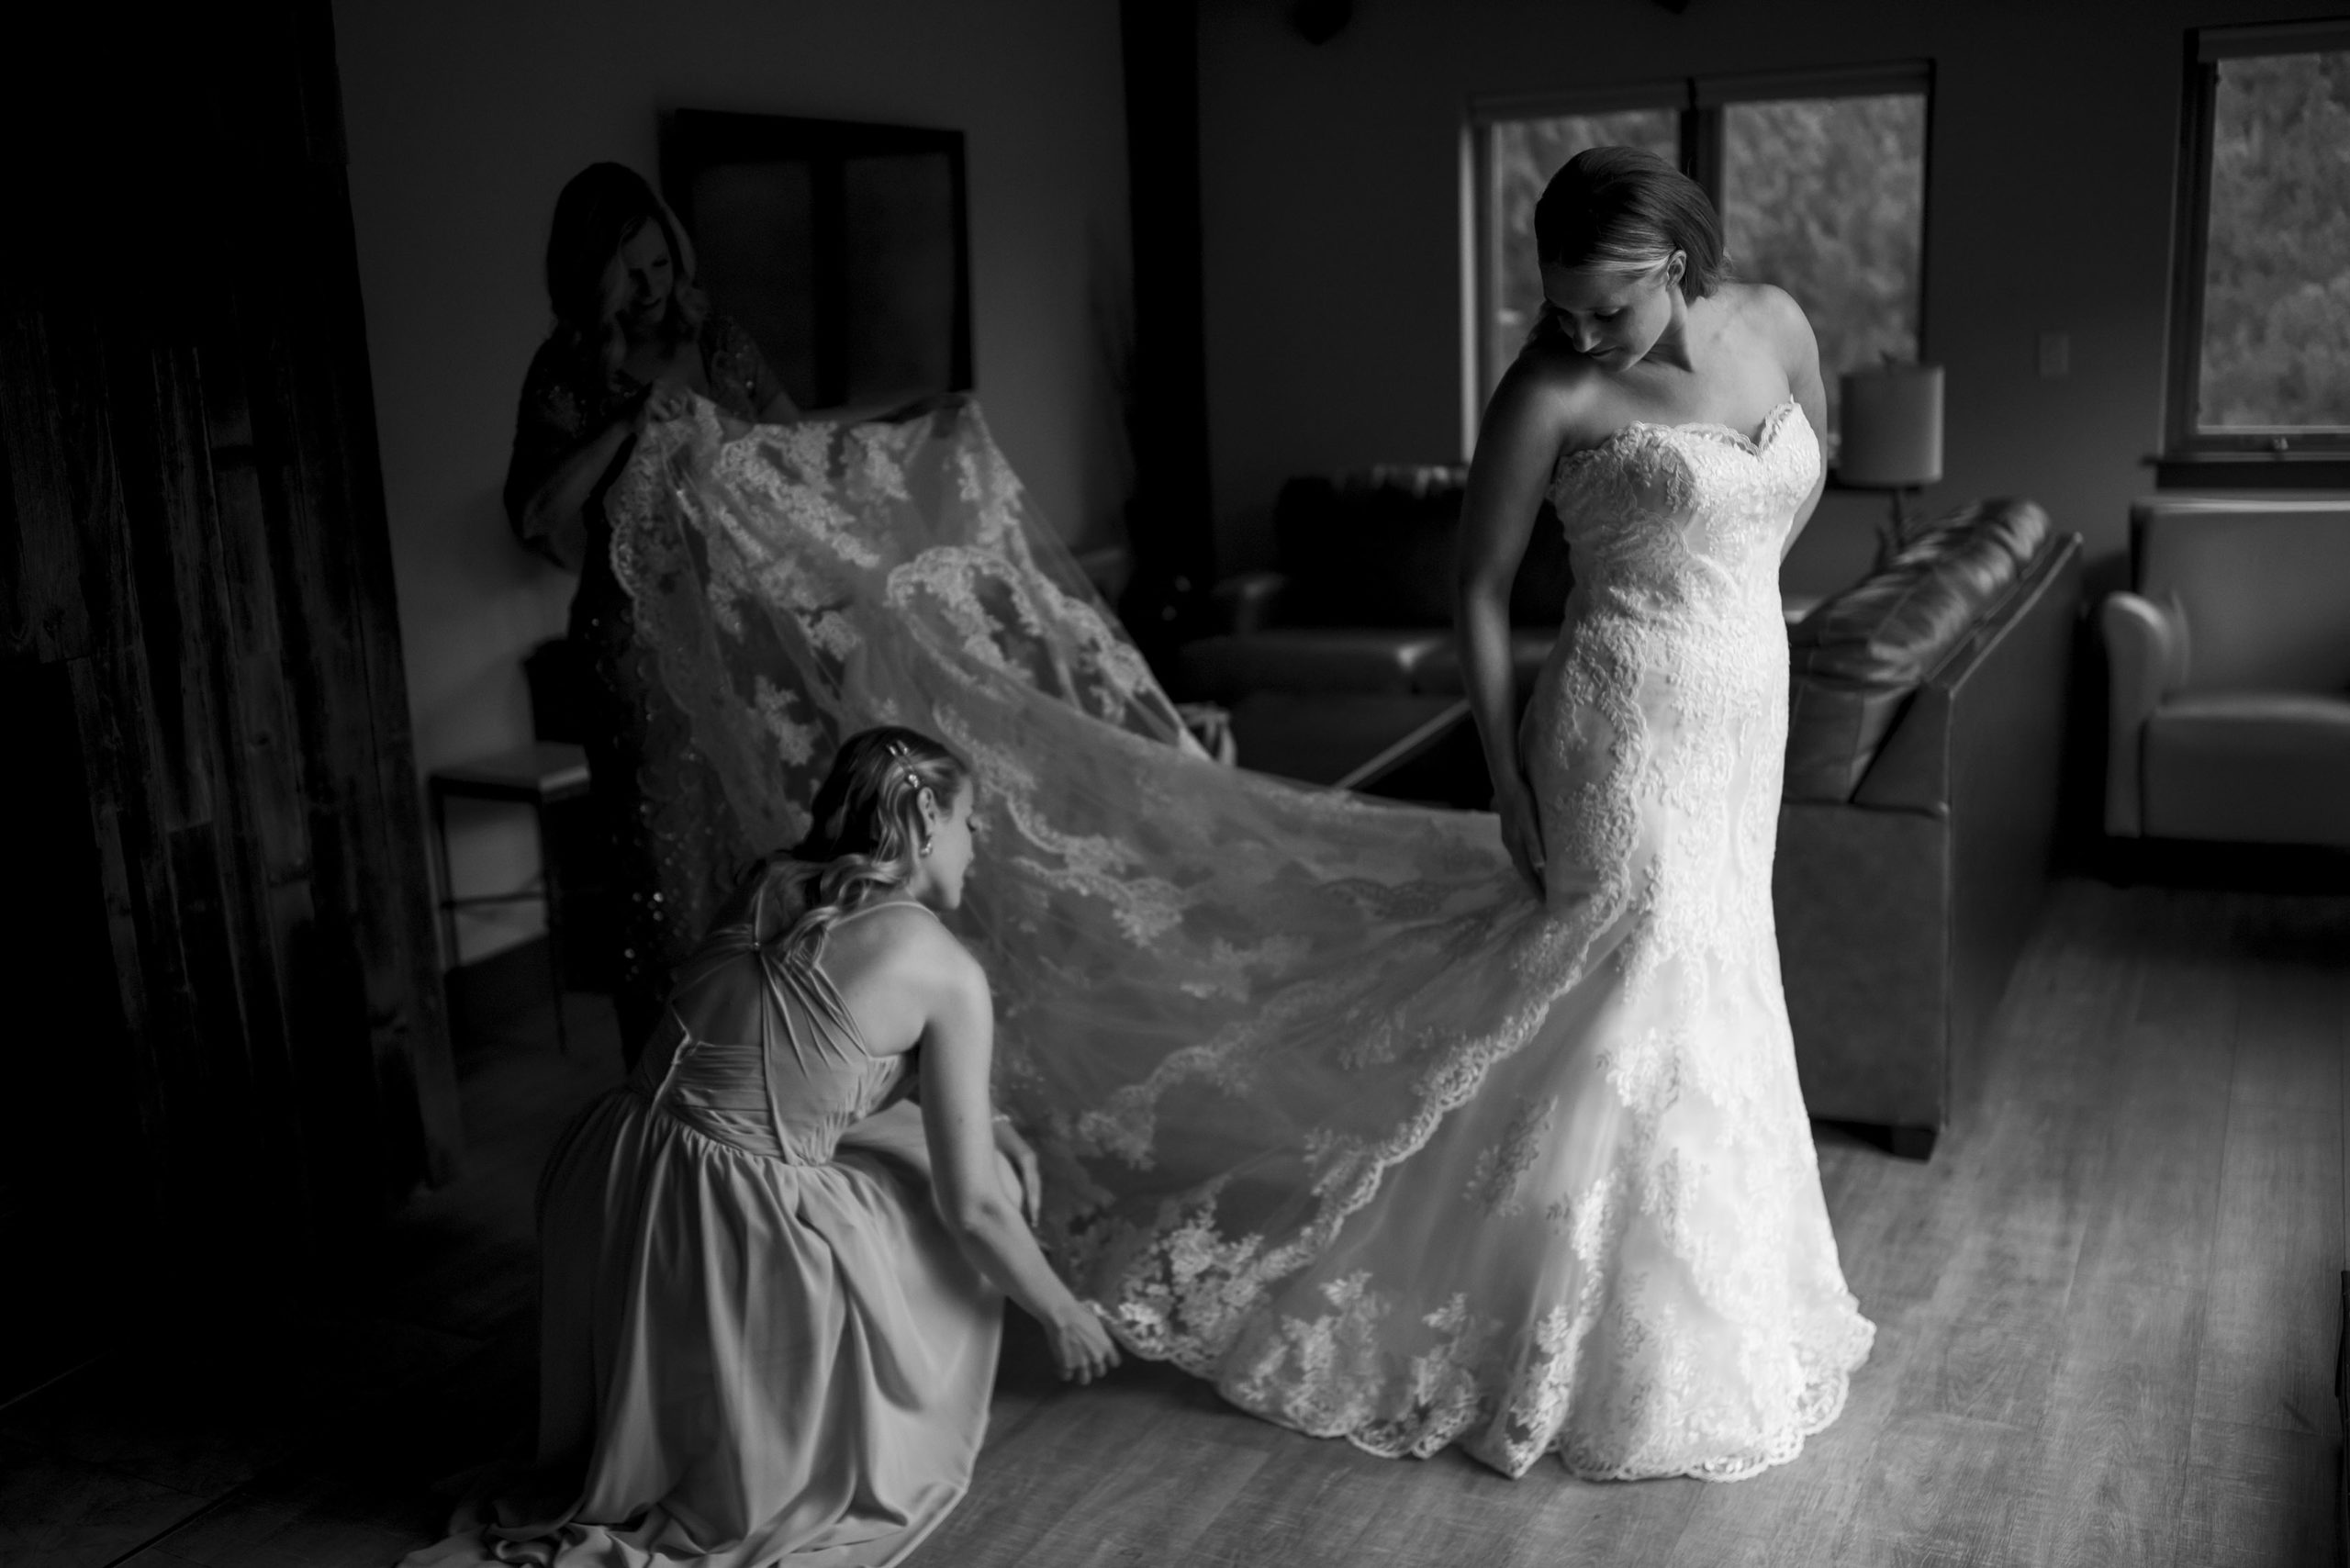 The bride has her wedding dress adjusted while getting ready